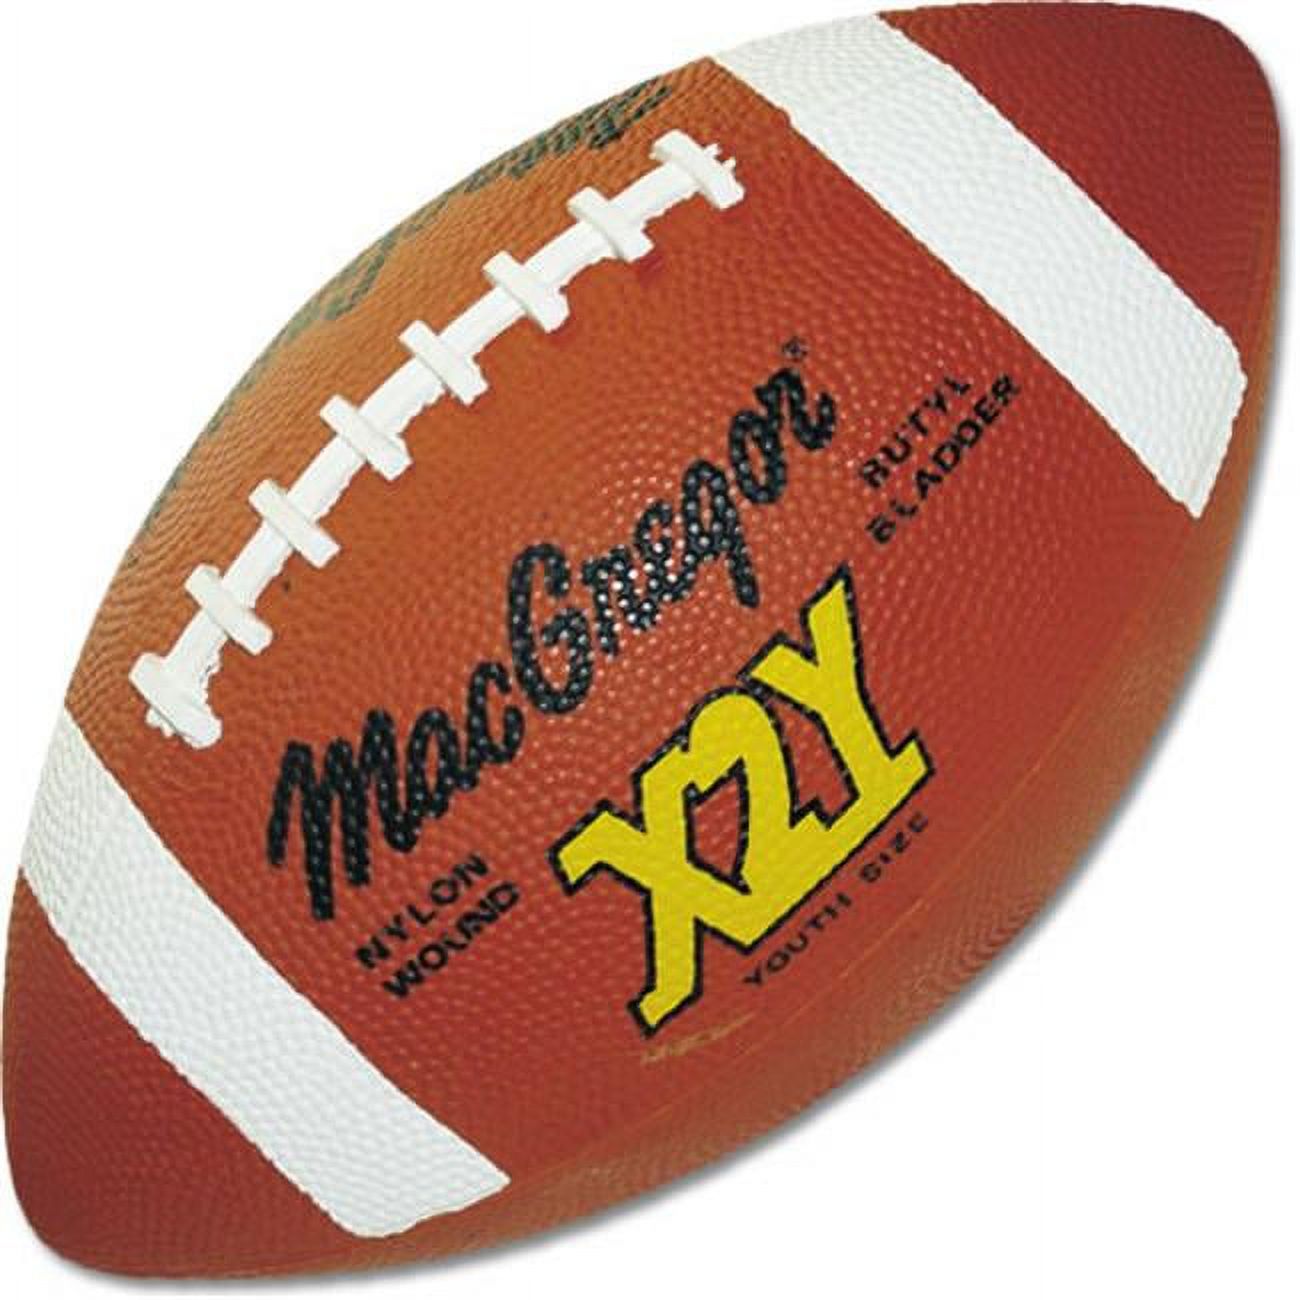 MacGregor X2Y Junior Rubber Official Youth Football - image 1 of 2